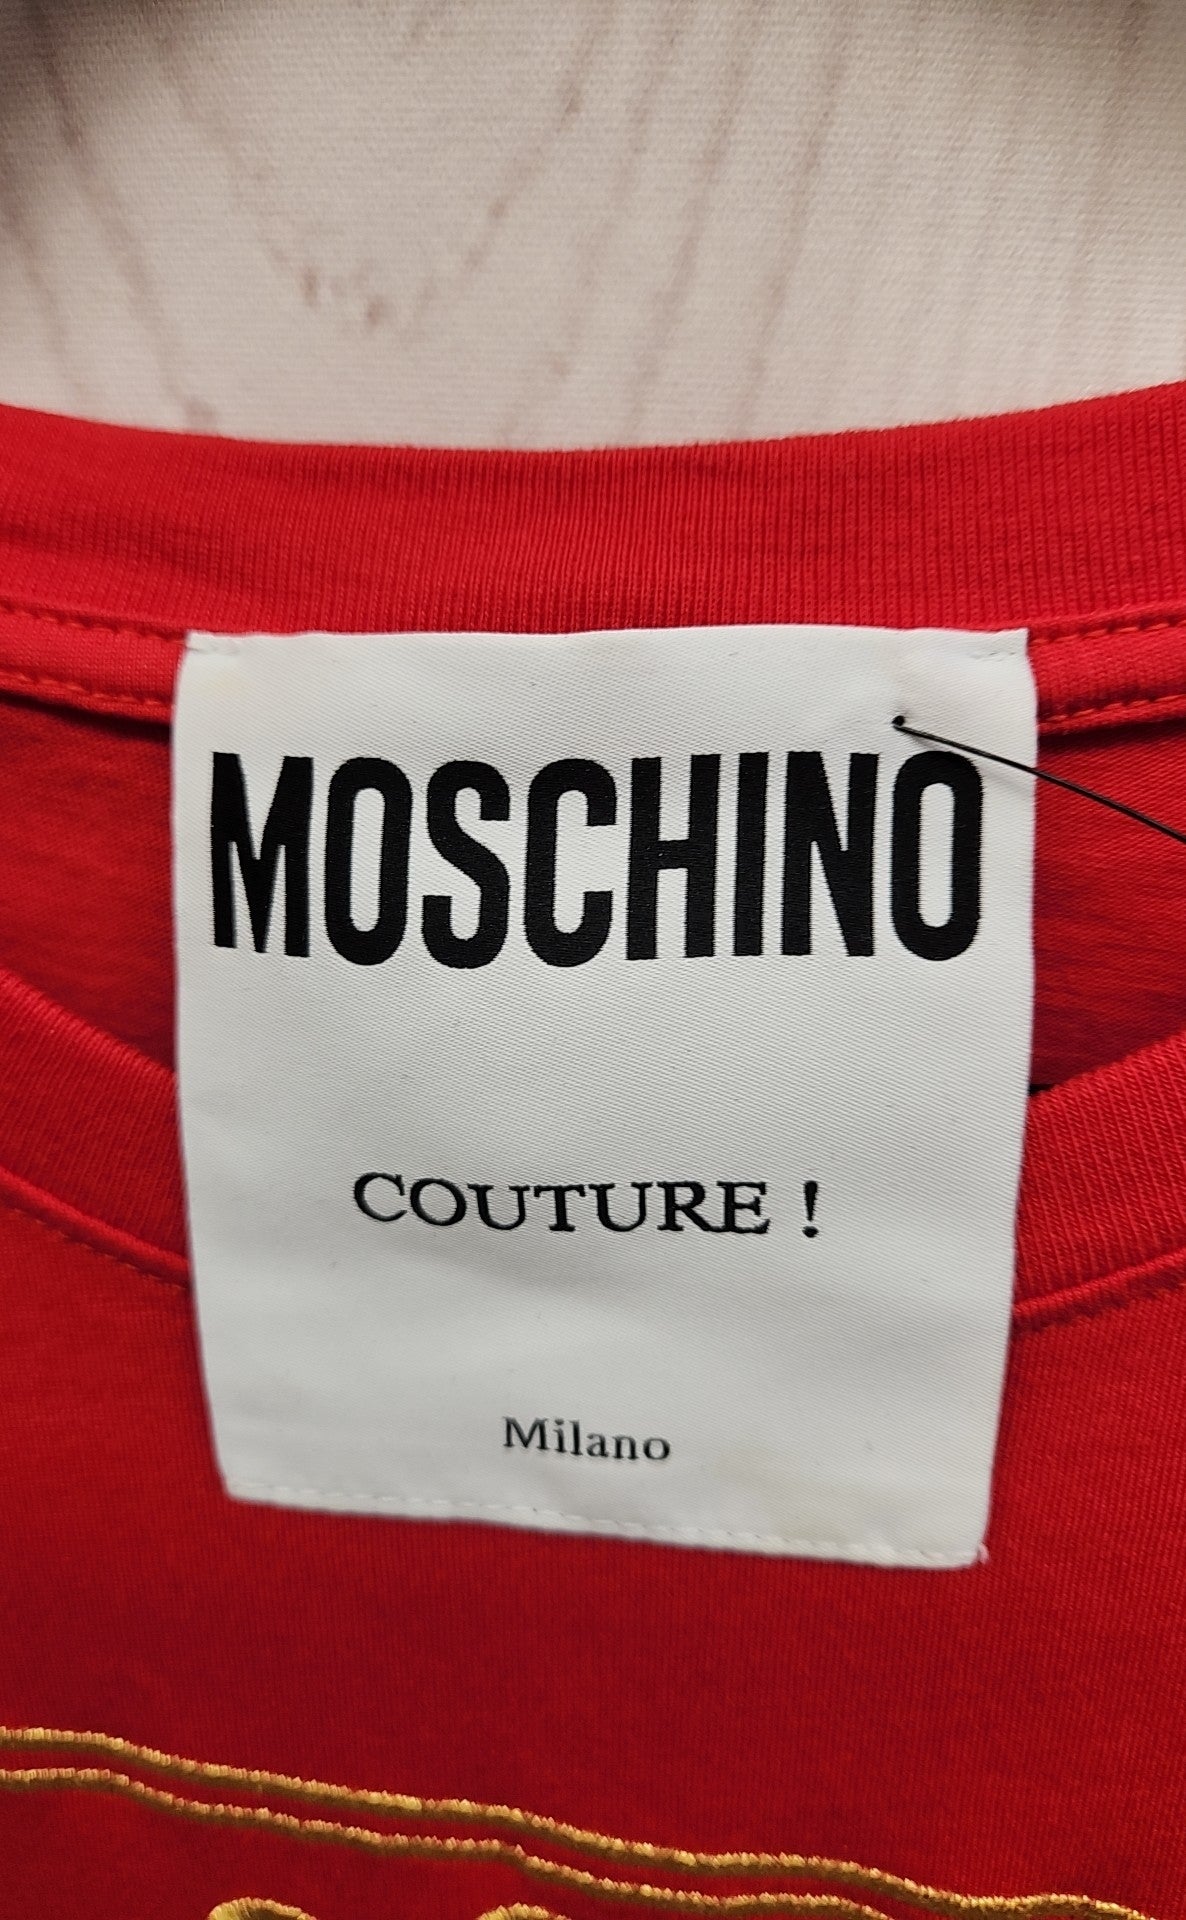 Moschino Couture In Love We Trust Women's Size S Red Dress